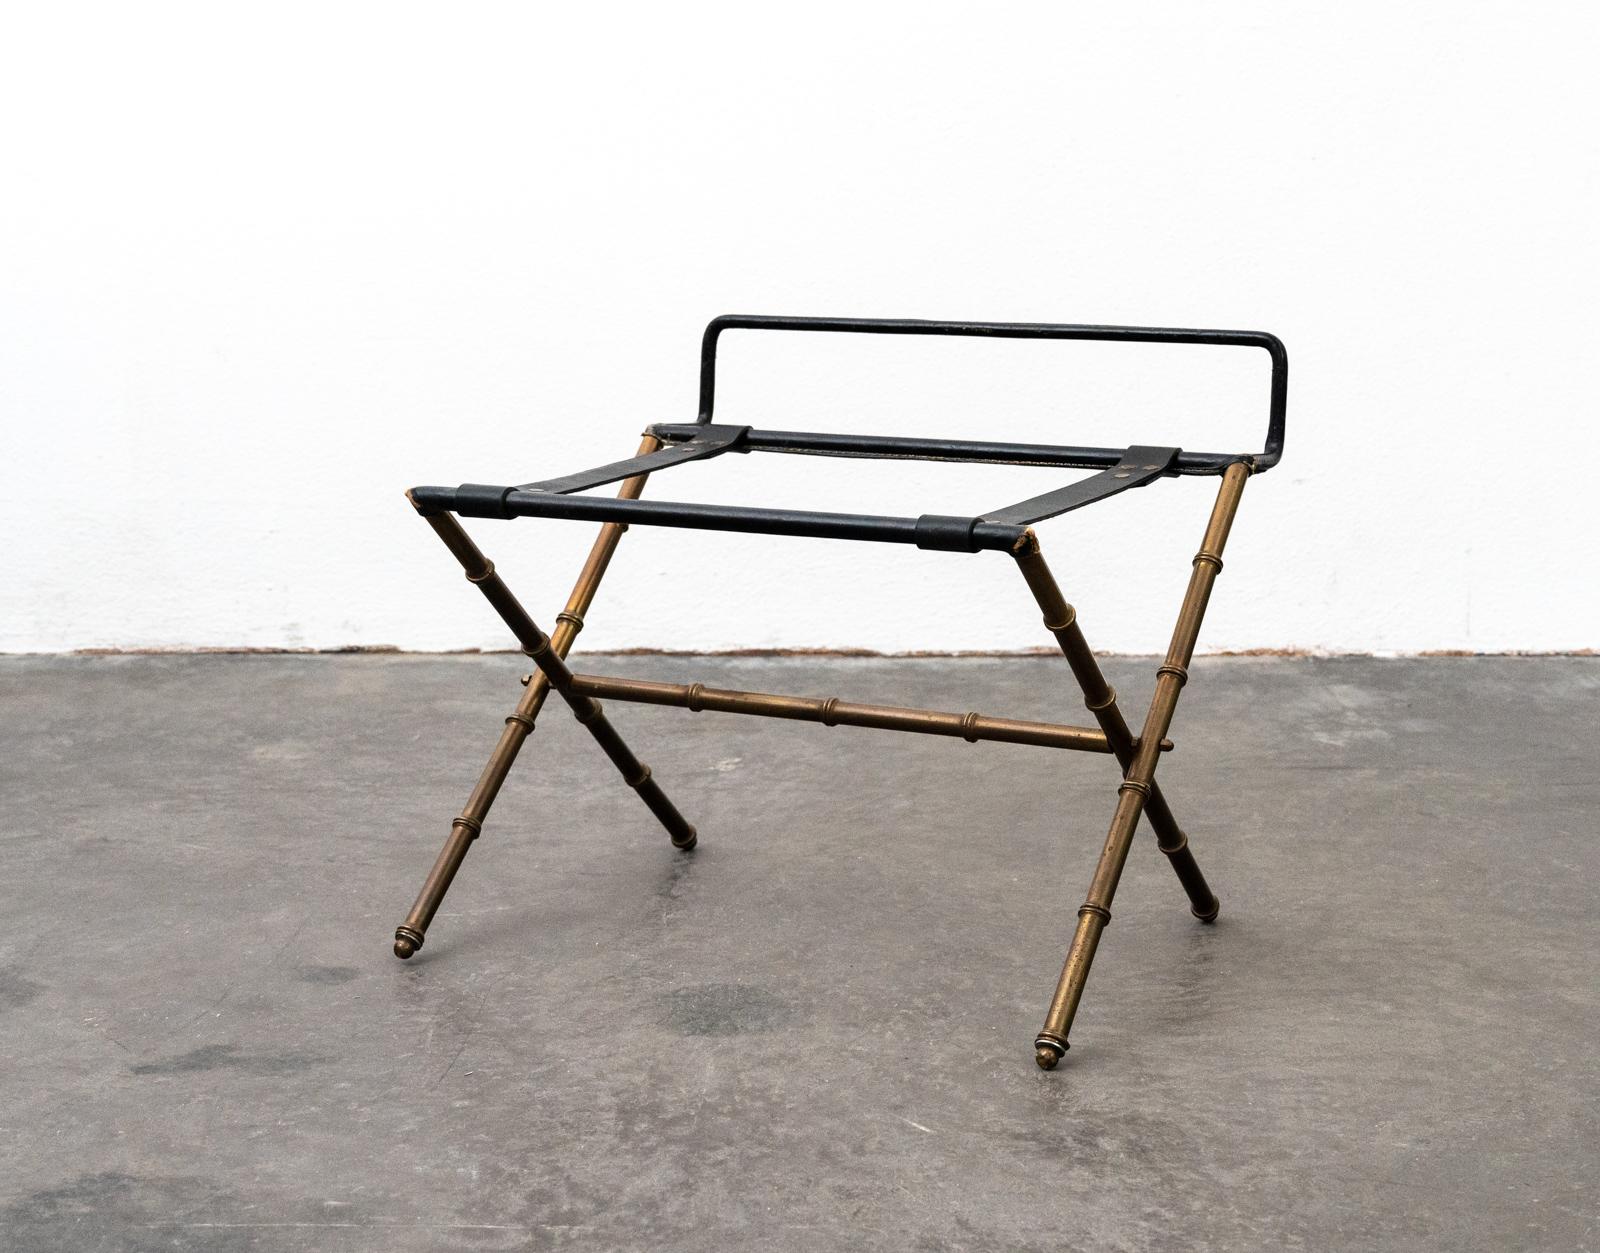 Foldable luggage rack in thick pique-sellier leather and brass faux bamboo by Jacques Adnet supplied to the Majestic hotel in Cannes around 1955
(Open dimensions: 61cm W x 51cm H x 55cm D)

Jacques Adnet was a French art deco modernist designer,